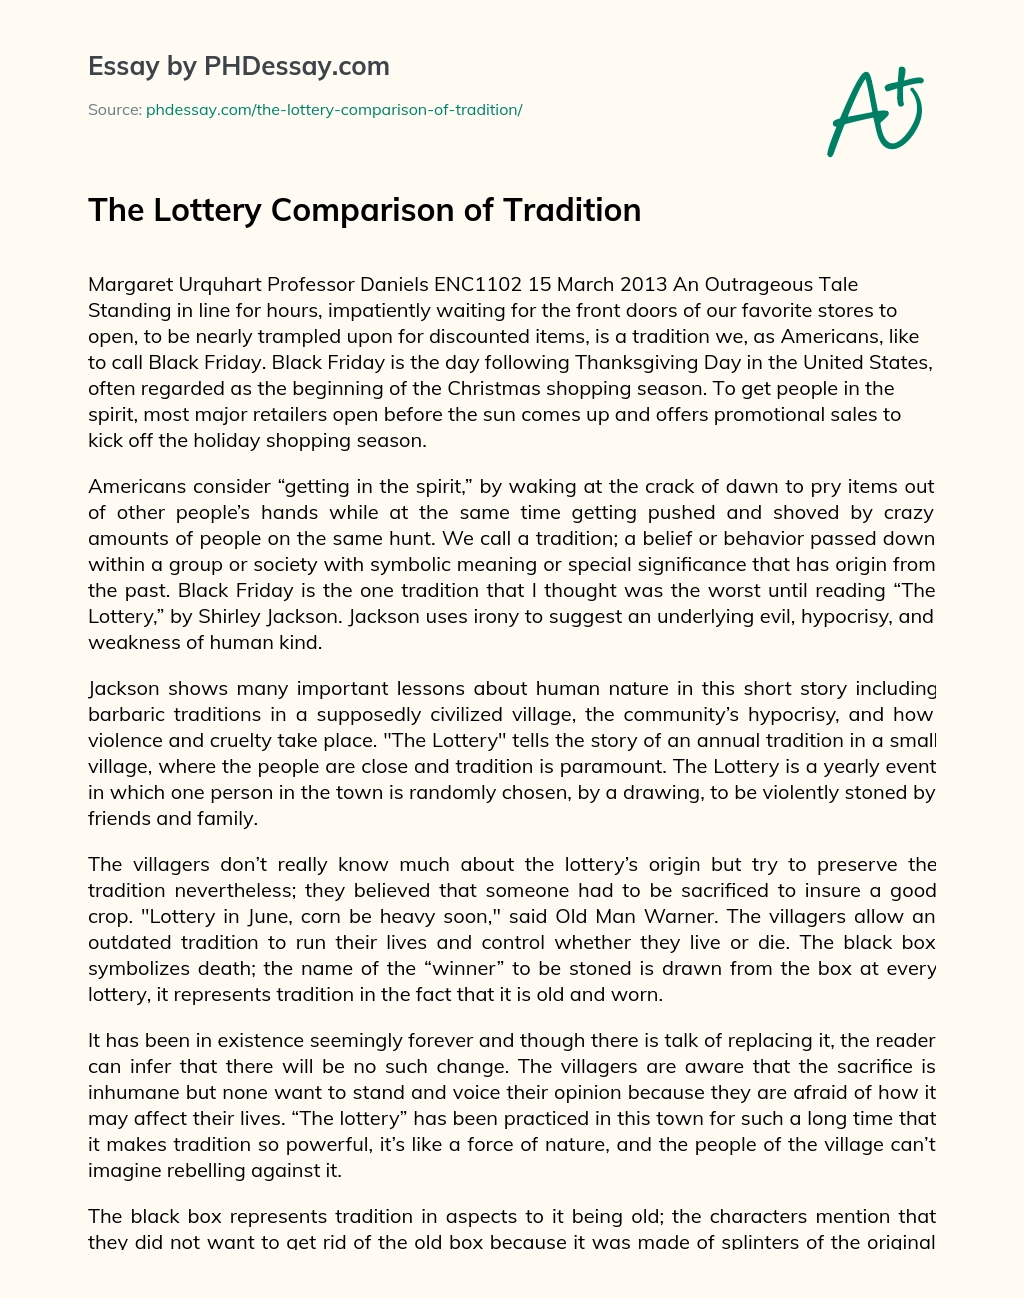 The Lottery Comparison of Tradition essay